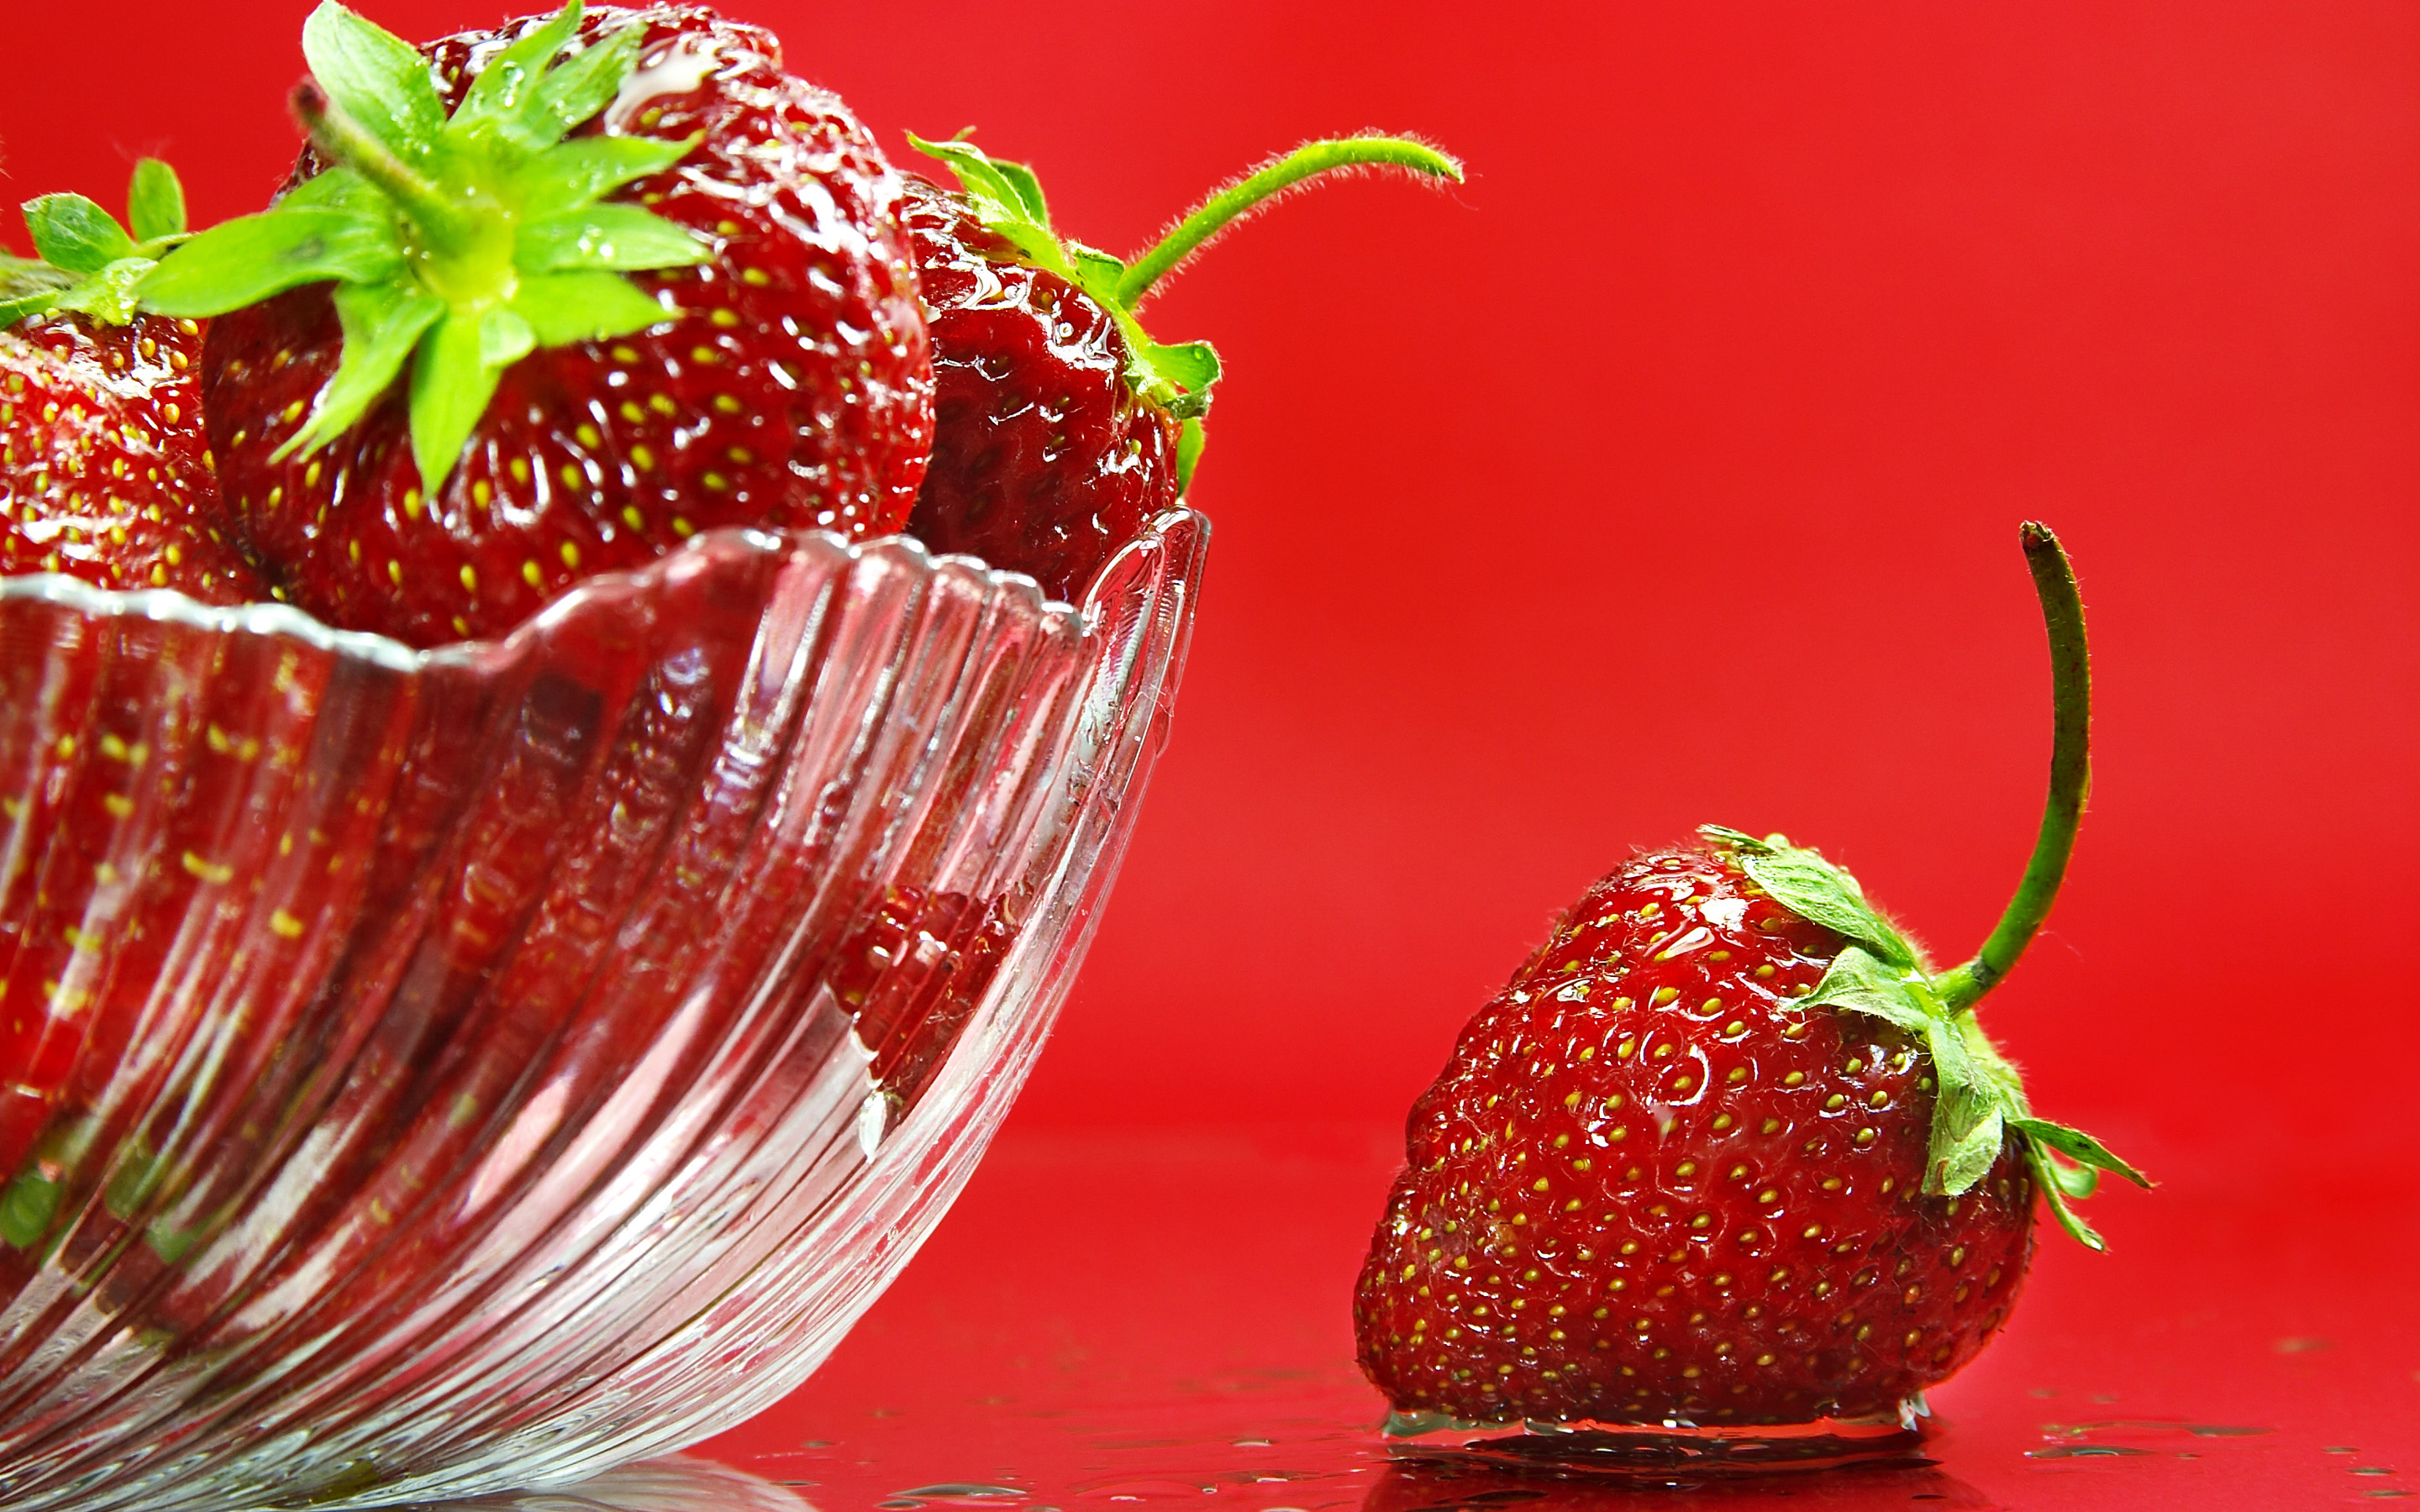 Find more cute strawberry wallpapers walljpegcom. cute strawberry wallpaper...